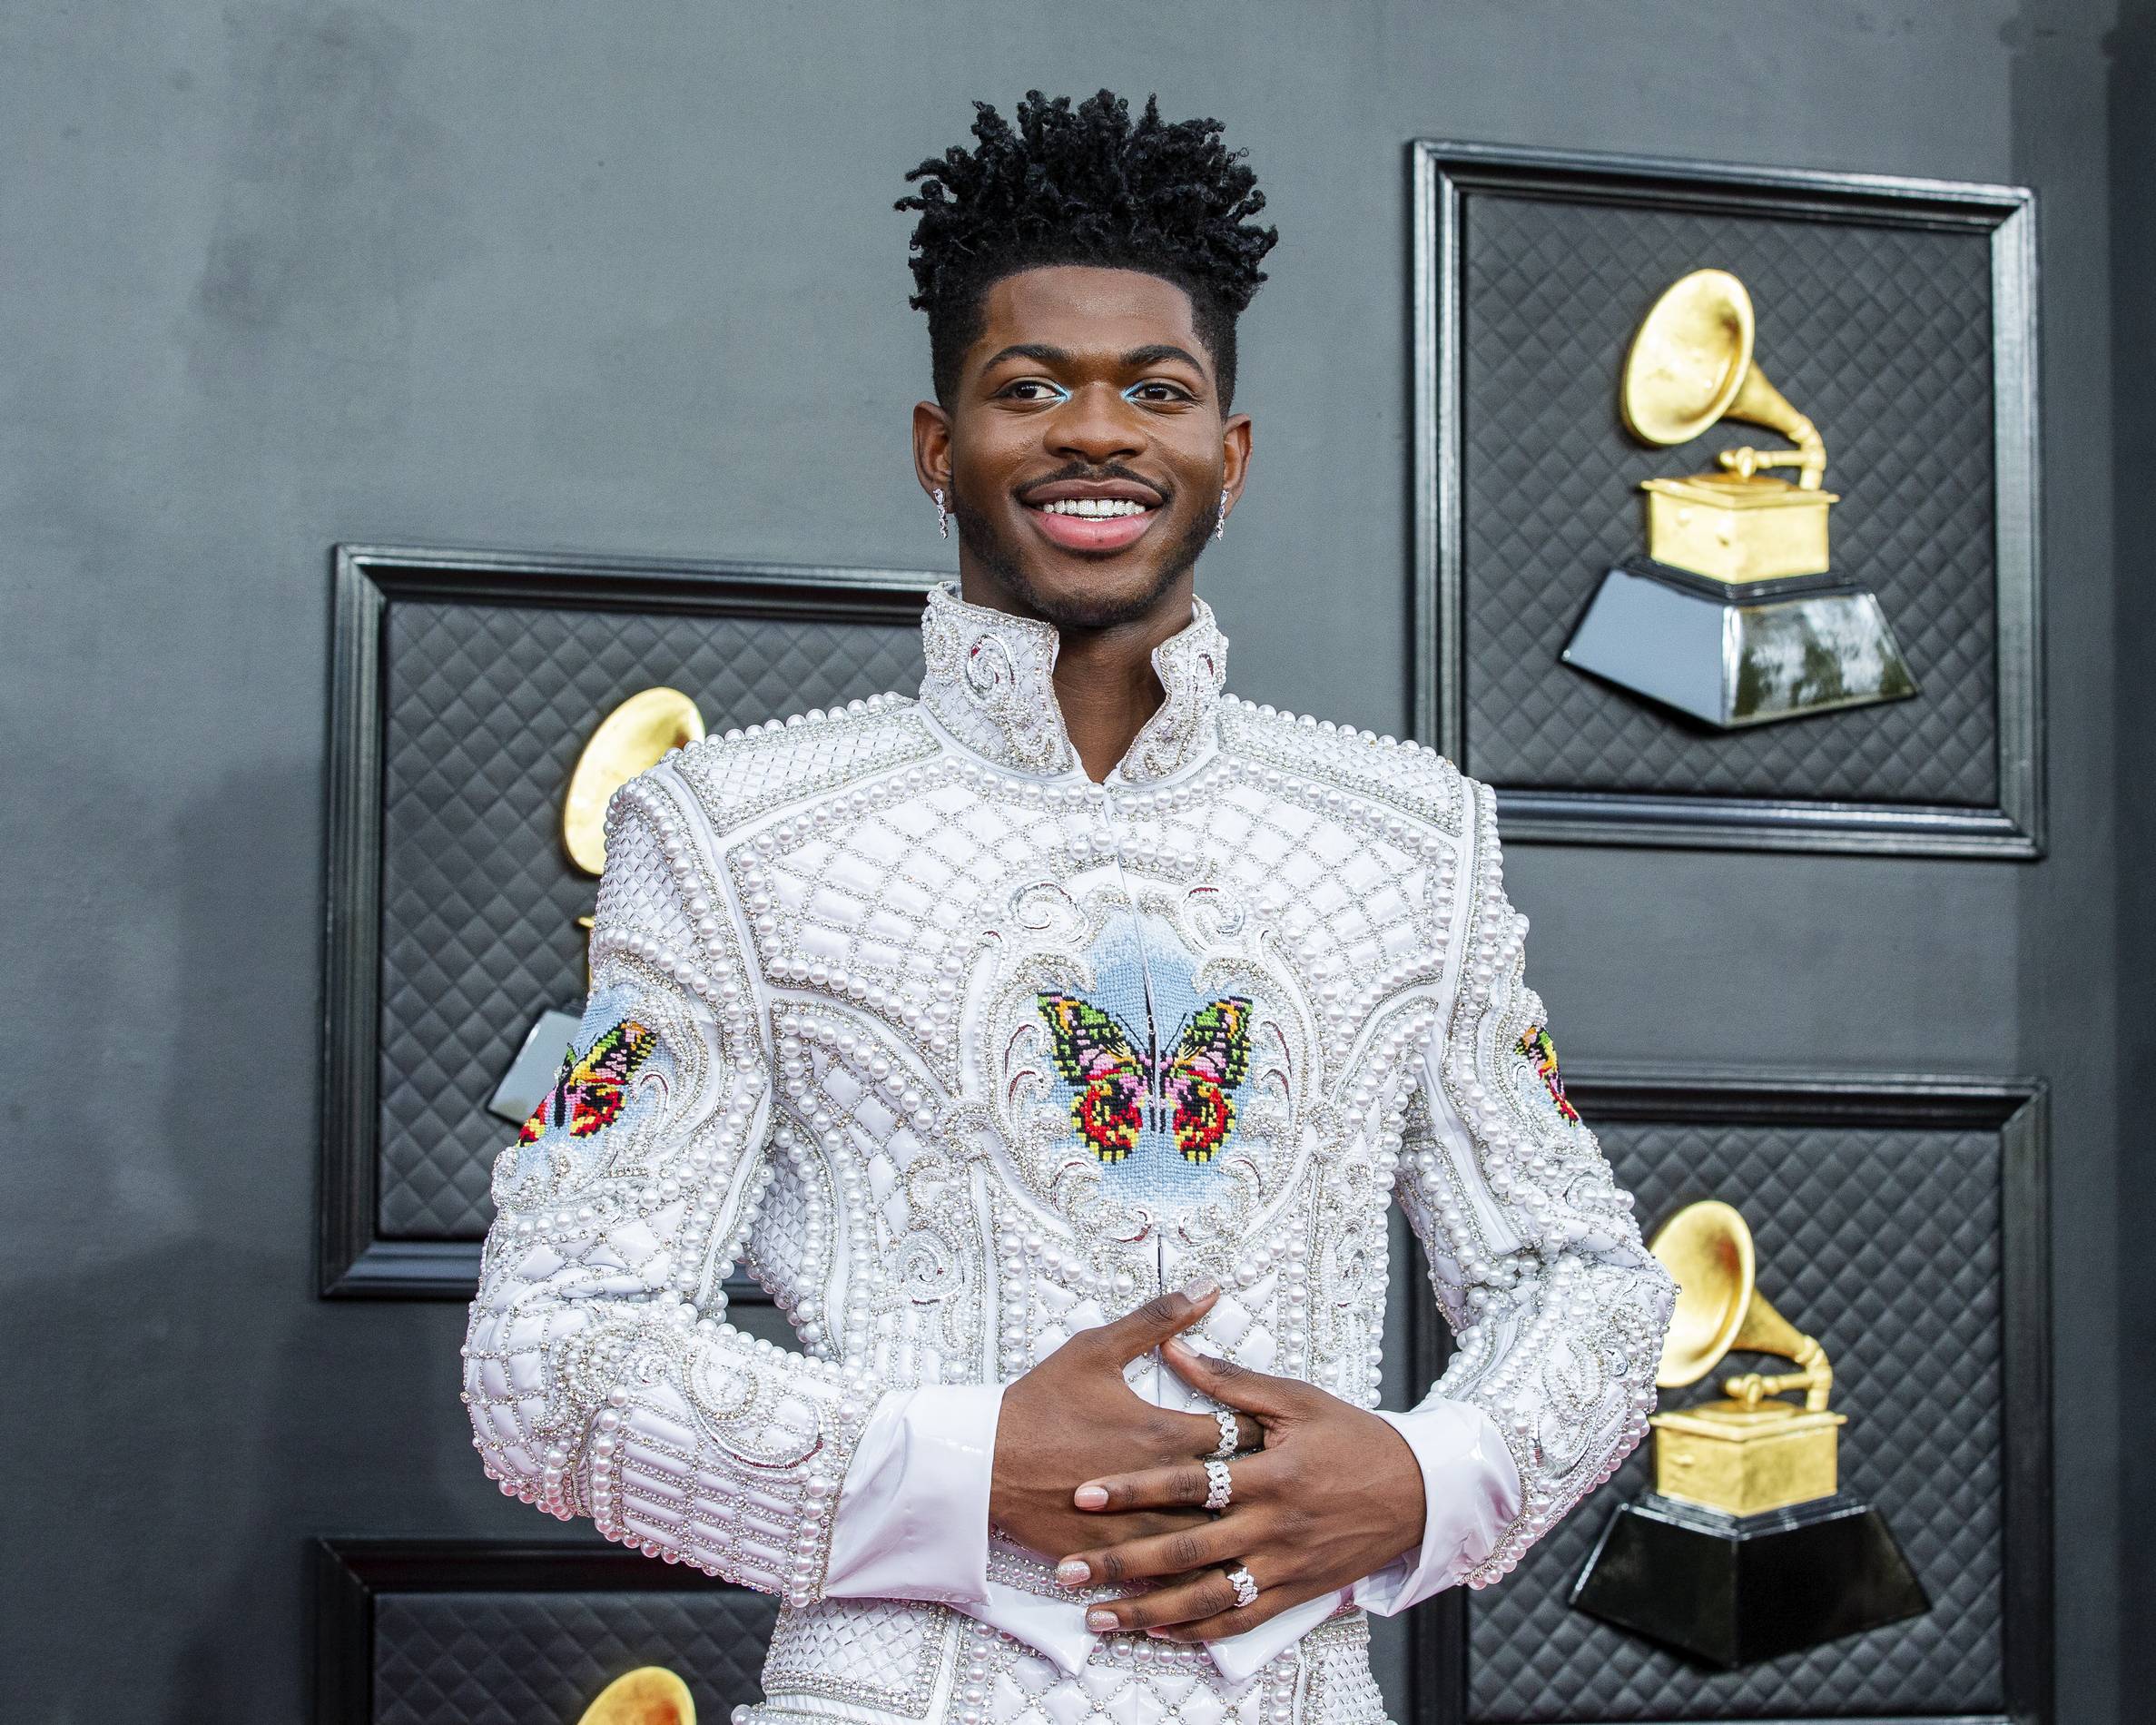 Lil Nas X attends the Grammy Awards